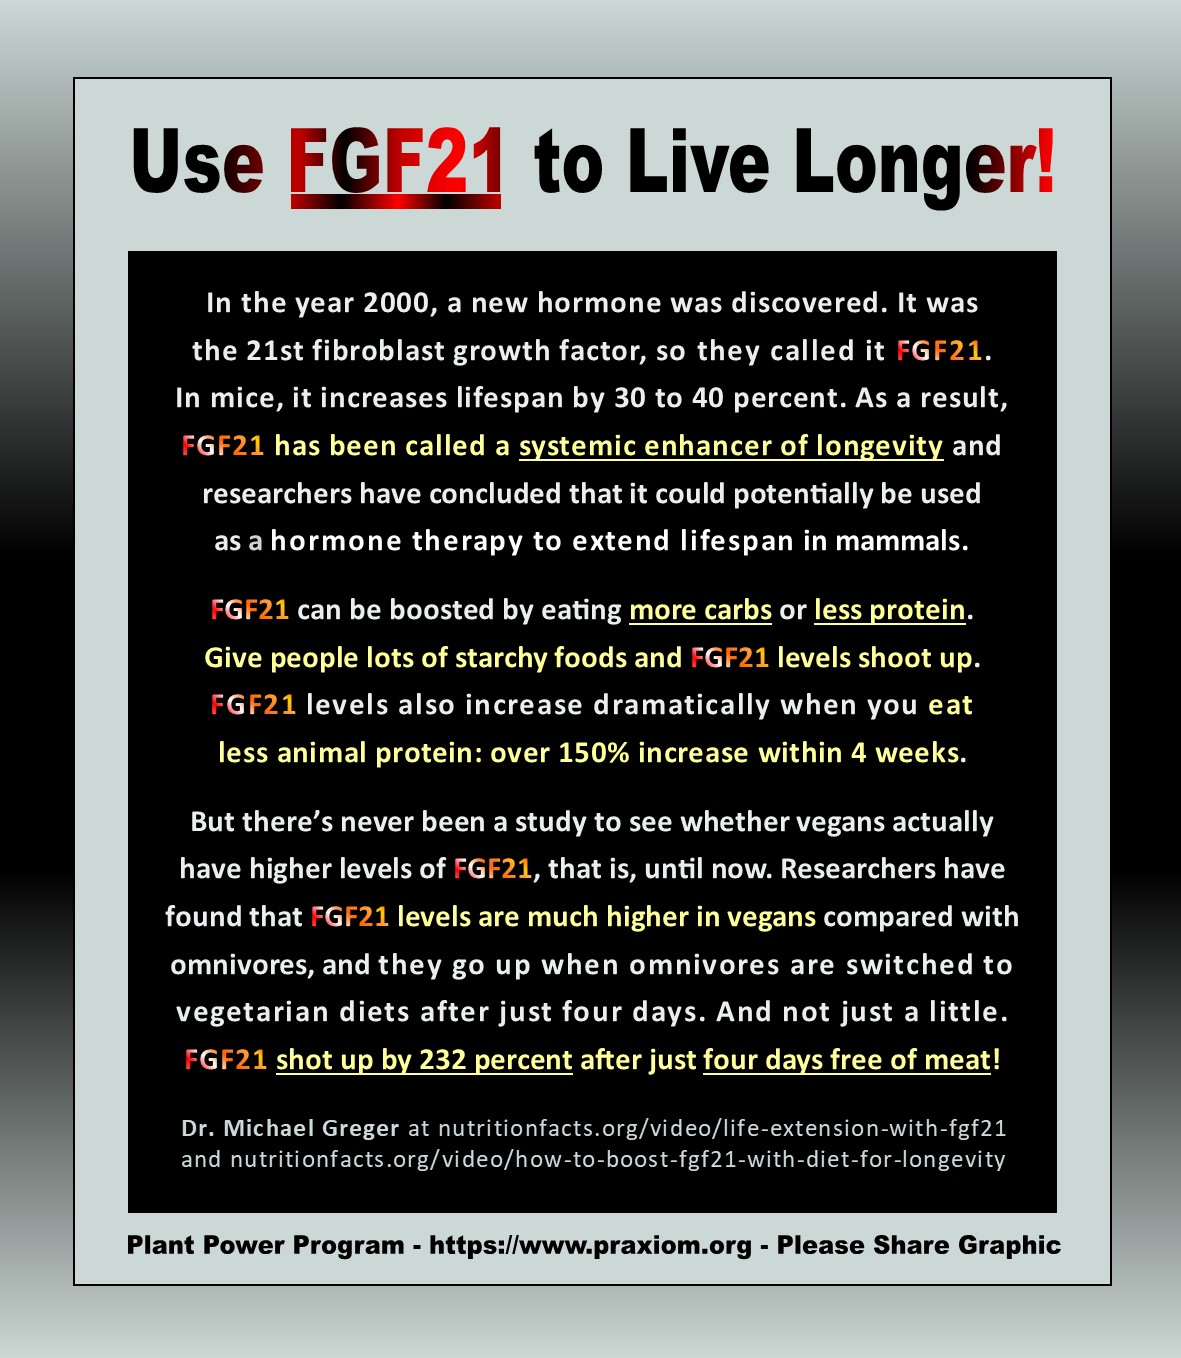 Use FGF21 to Live Longer - Dr. Michael Greger